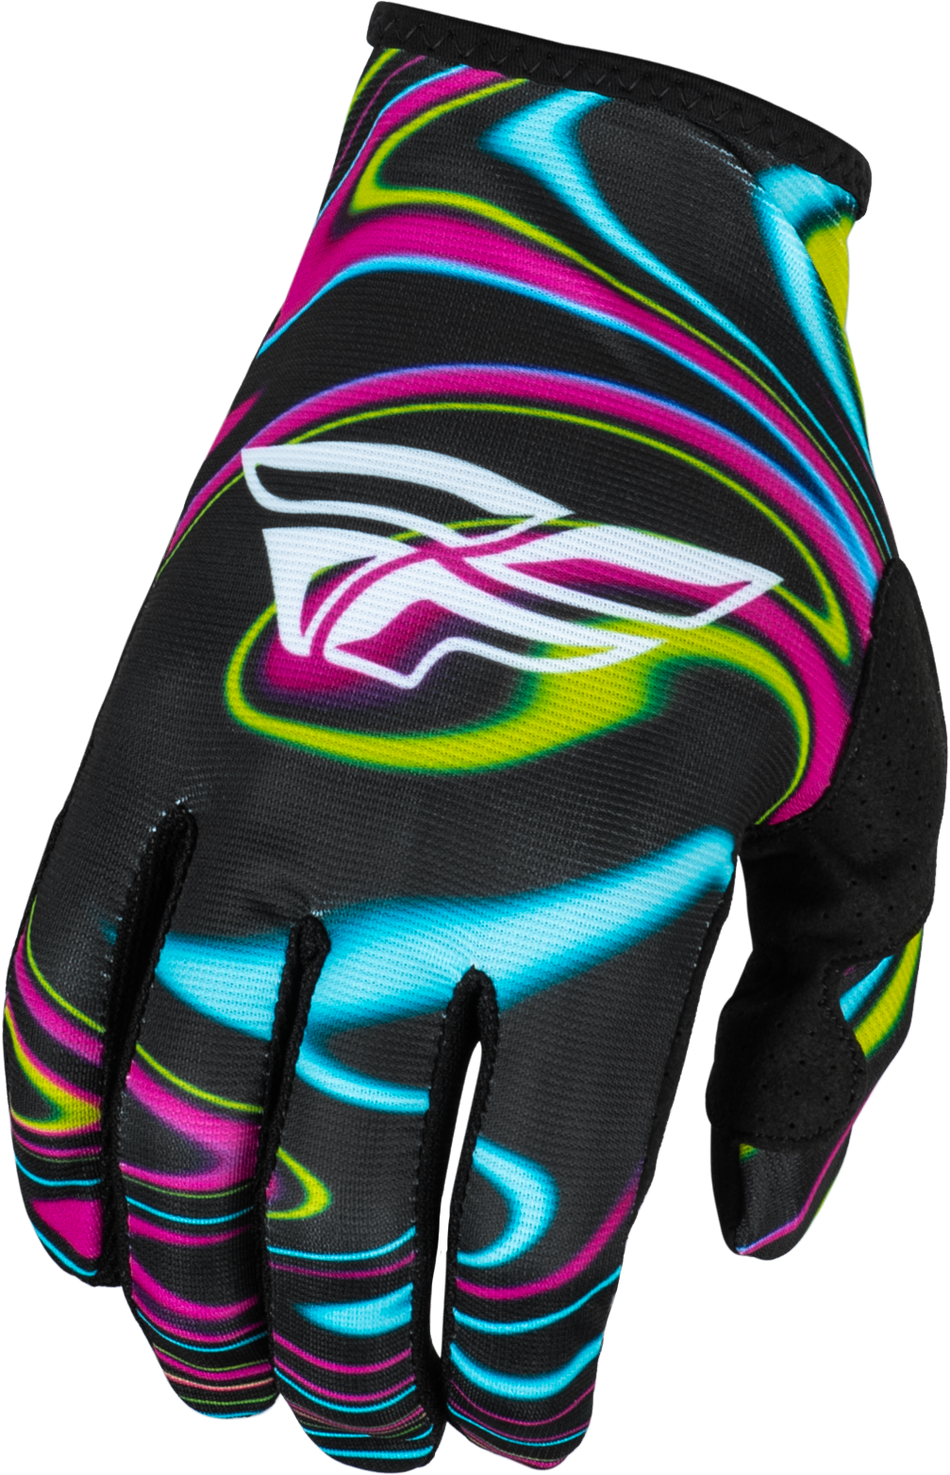 FLY RACING Youth Lite Warped Gloves Black/Pink/Electric Blue Yl 377-743YL